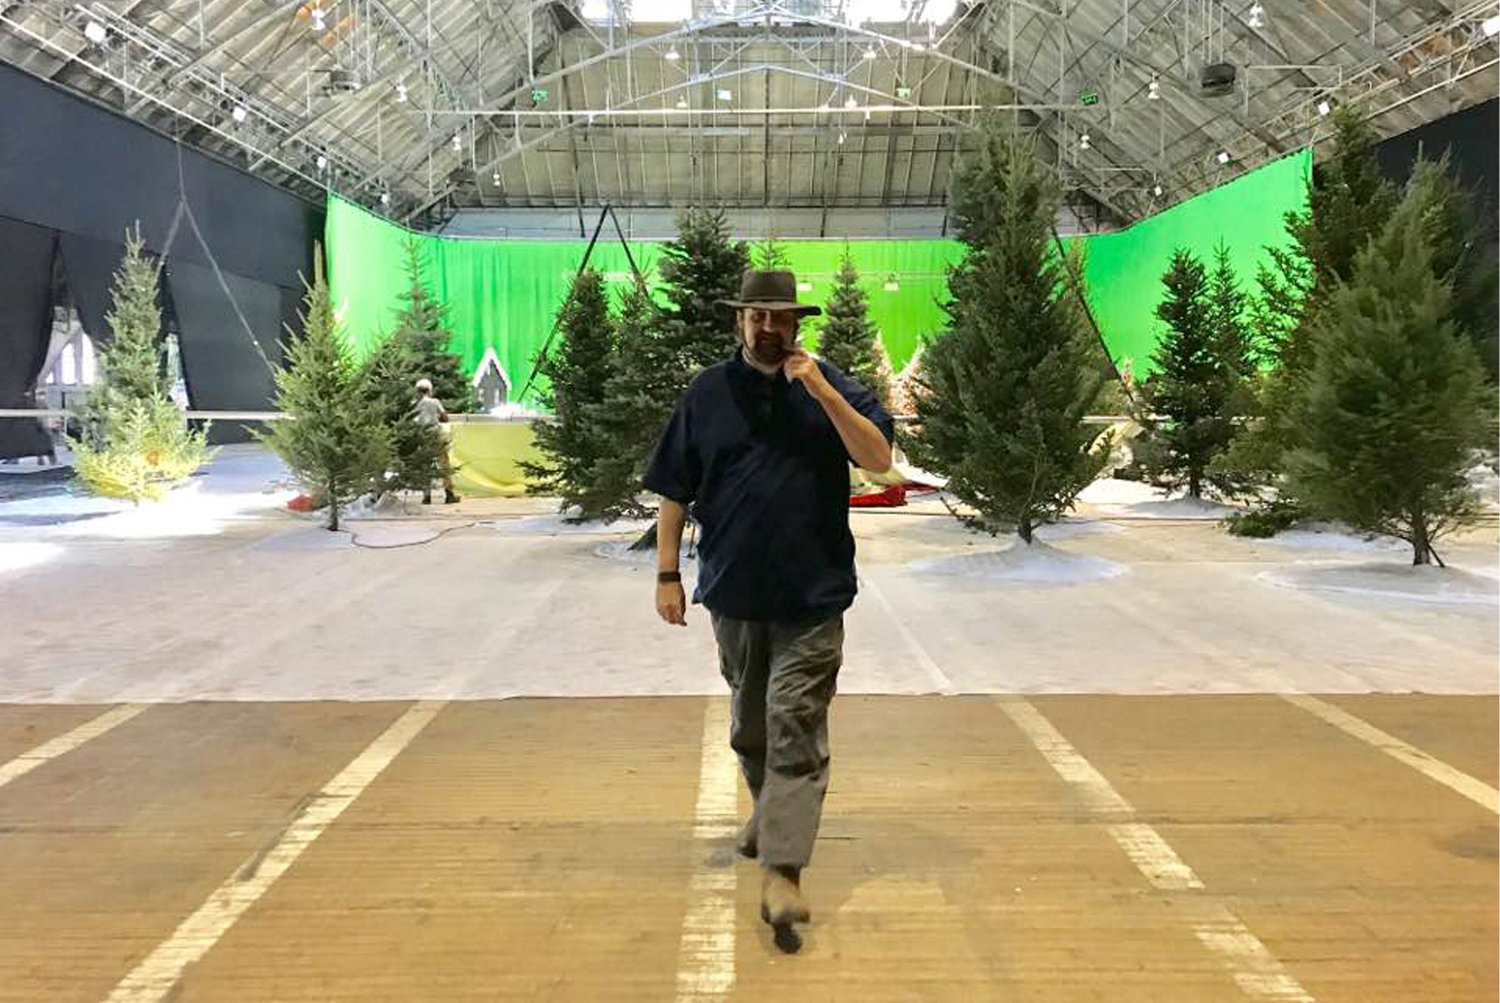 Steven Feinberg inside the Cranston Street Armory at the beginning stage of building the Christmas-land set for the AMC horror series NOS4A2 starring Zachary Quinto